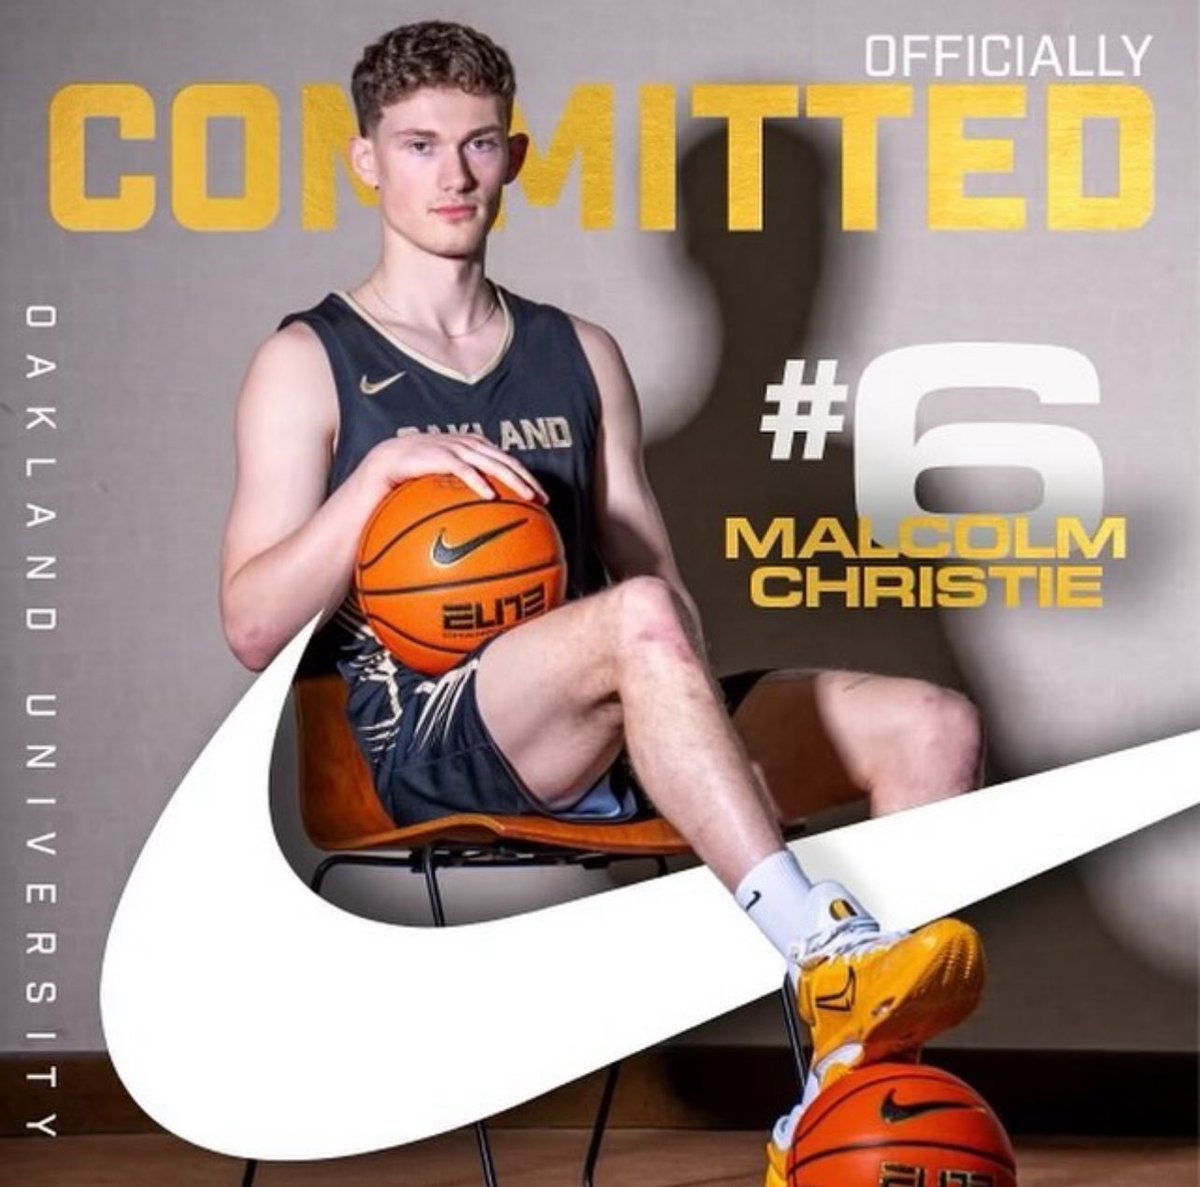 Usports star guard Malcom Christie has committed to Oakland Was the best shooter that didn’t play D1 or D2 this season… is elite off the move, C&S and OTD Shot 37% on 11.3 attempts from deep and averaged 22.3 PPG Can’t emphasize how big of a get this was for Oakland